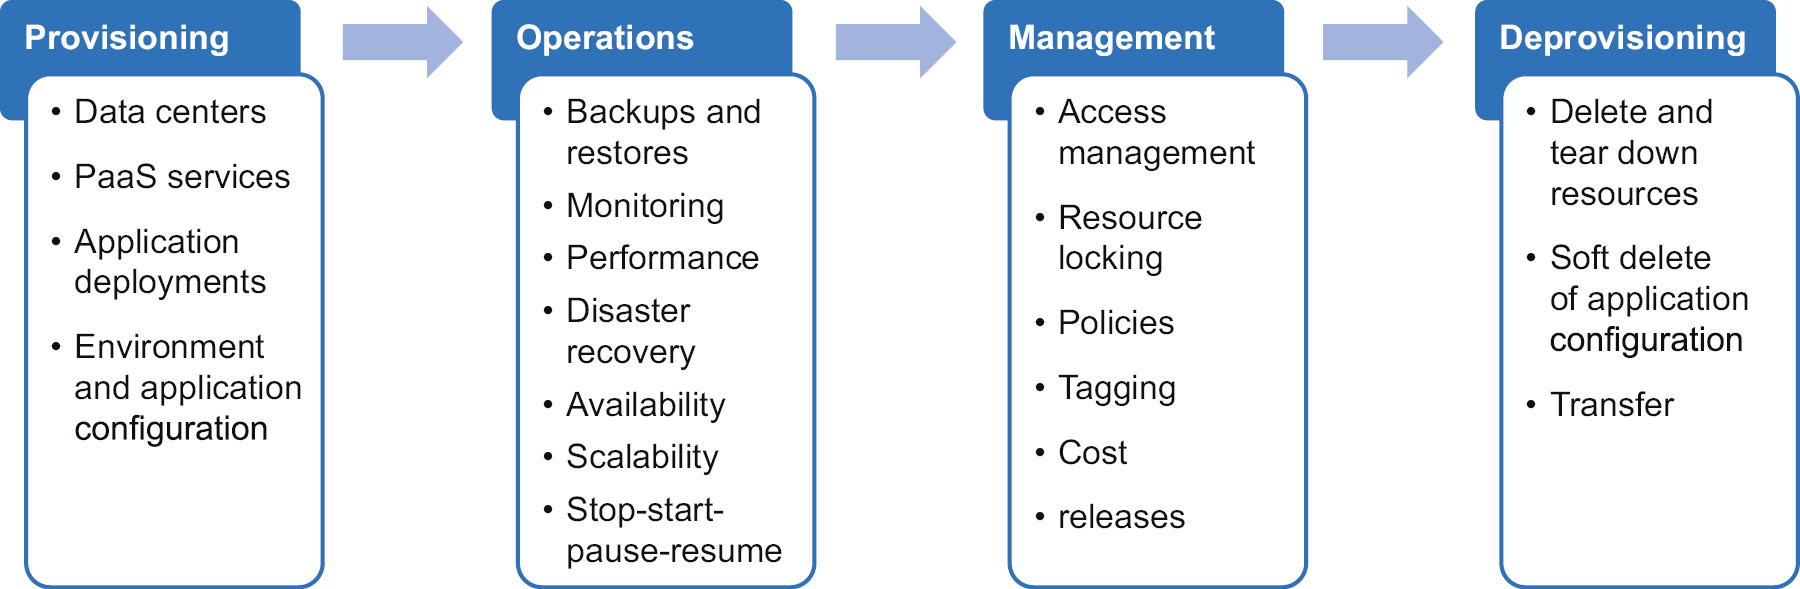 Automation use cases, including provisioning, operation, management, and deprovisioning.